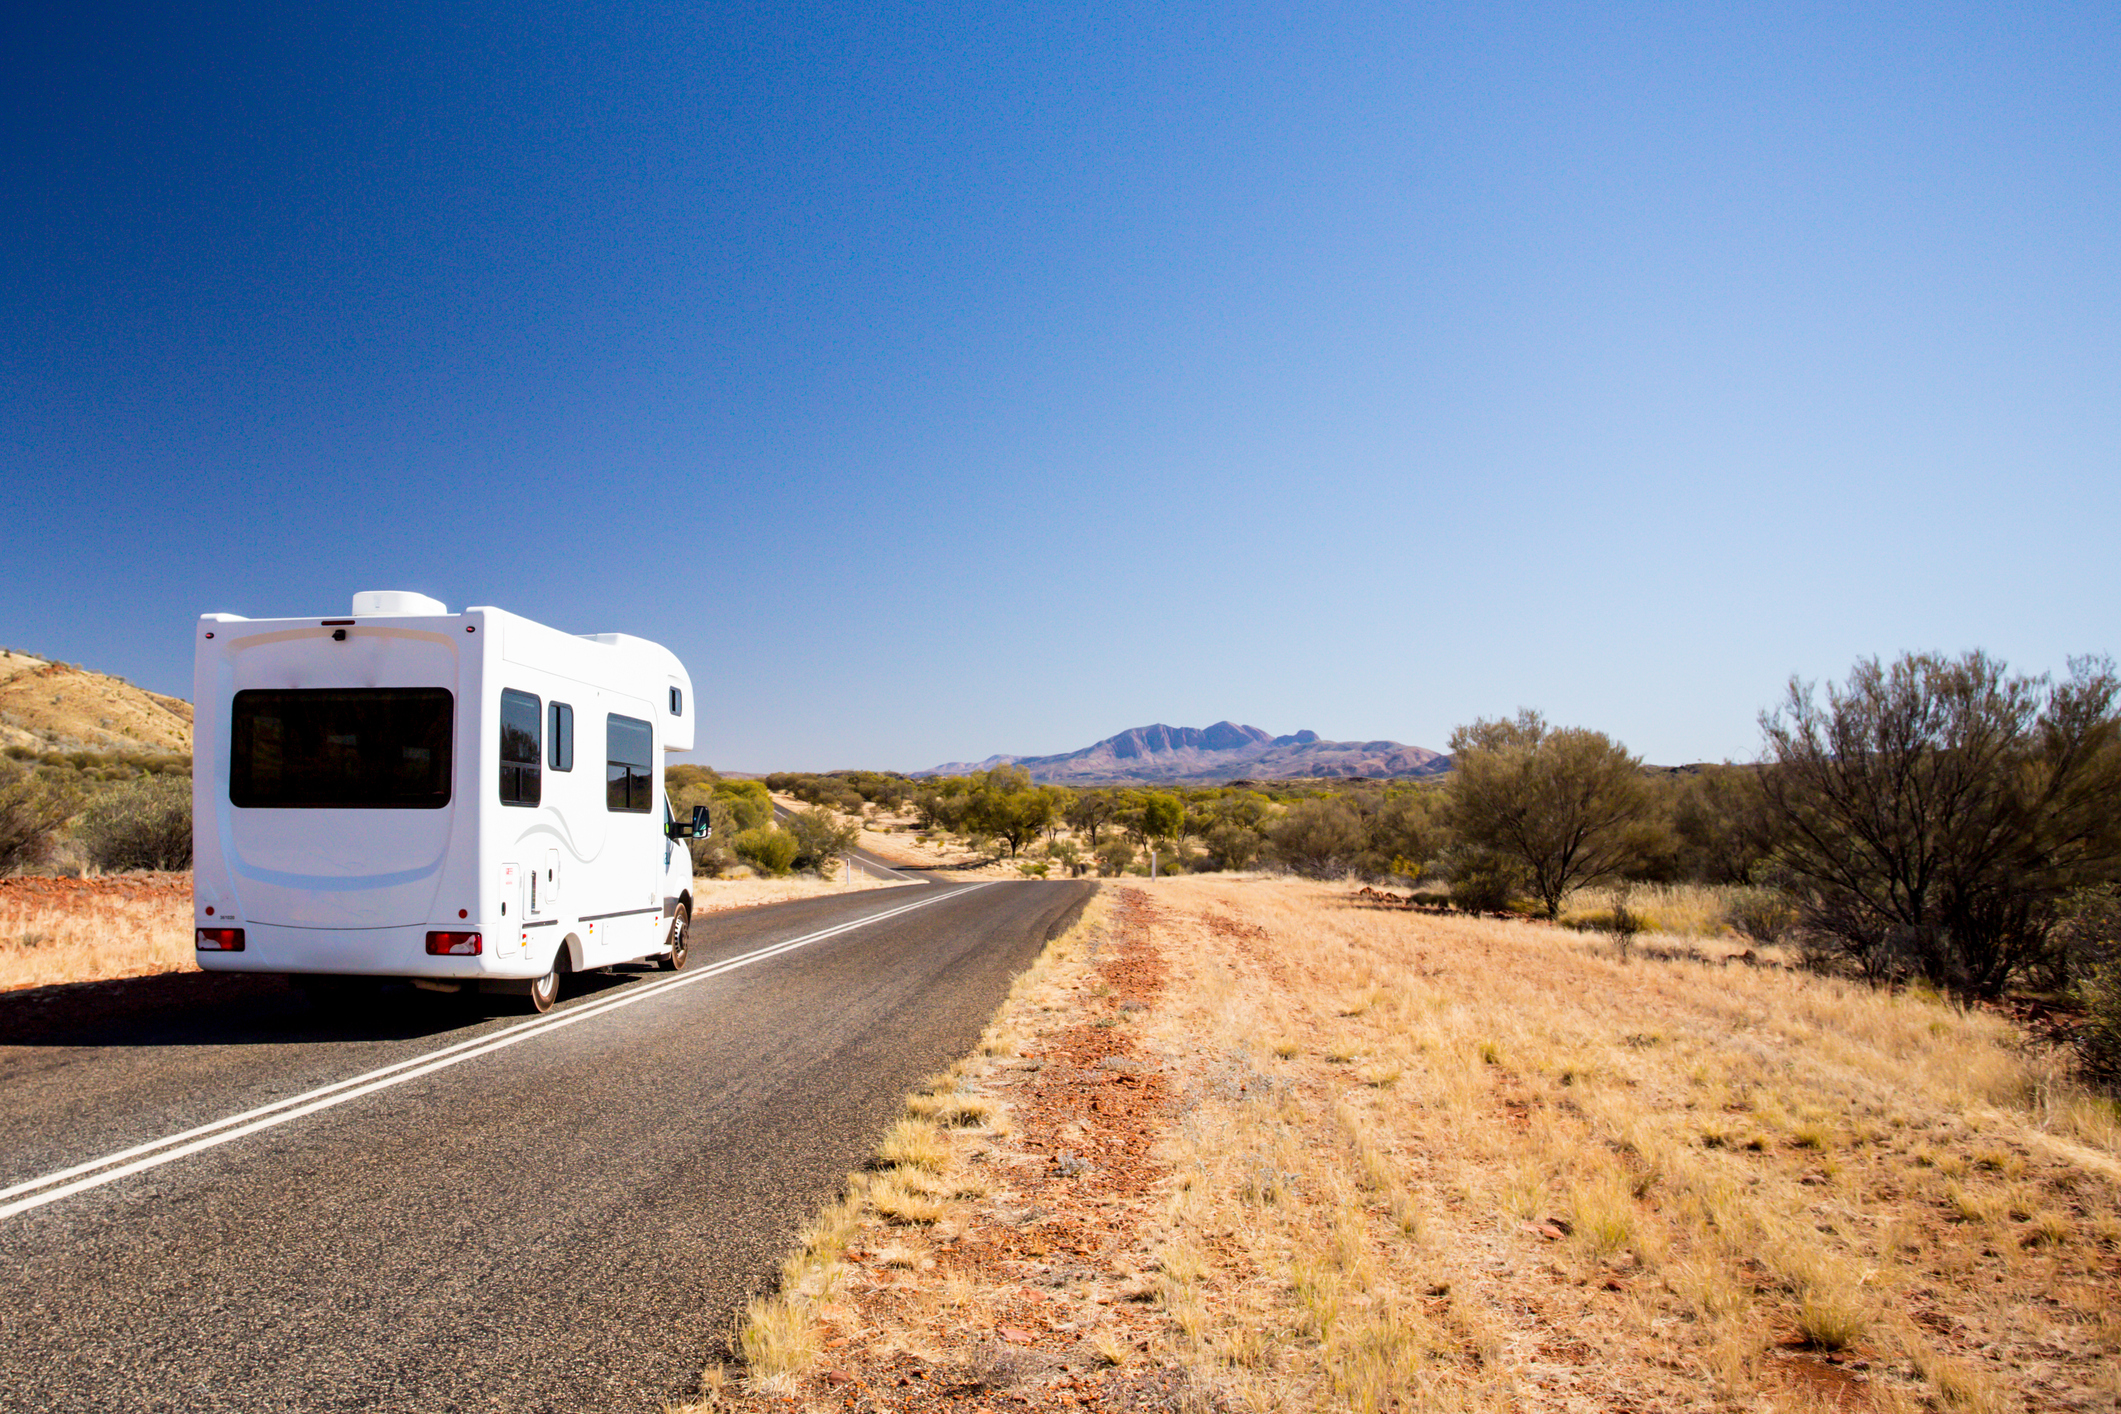 A motorhome on the open road.